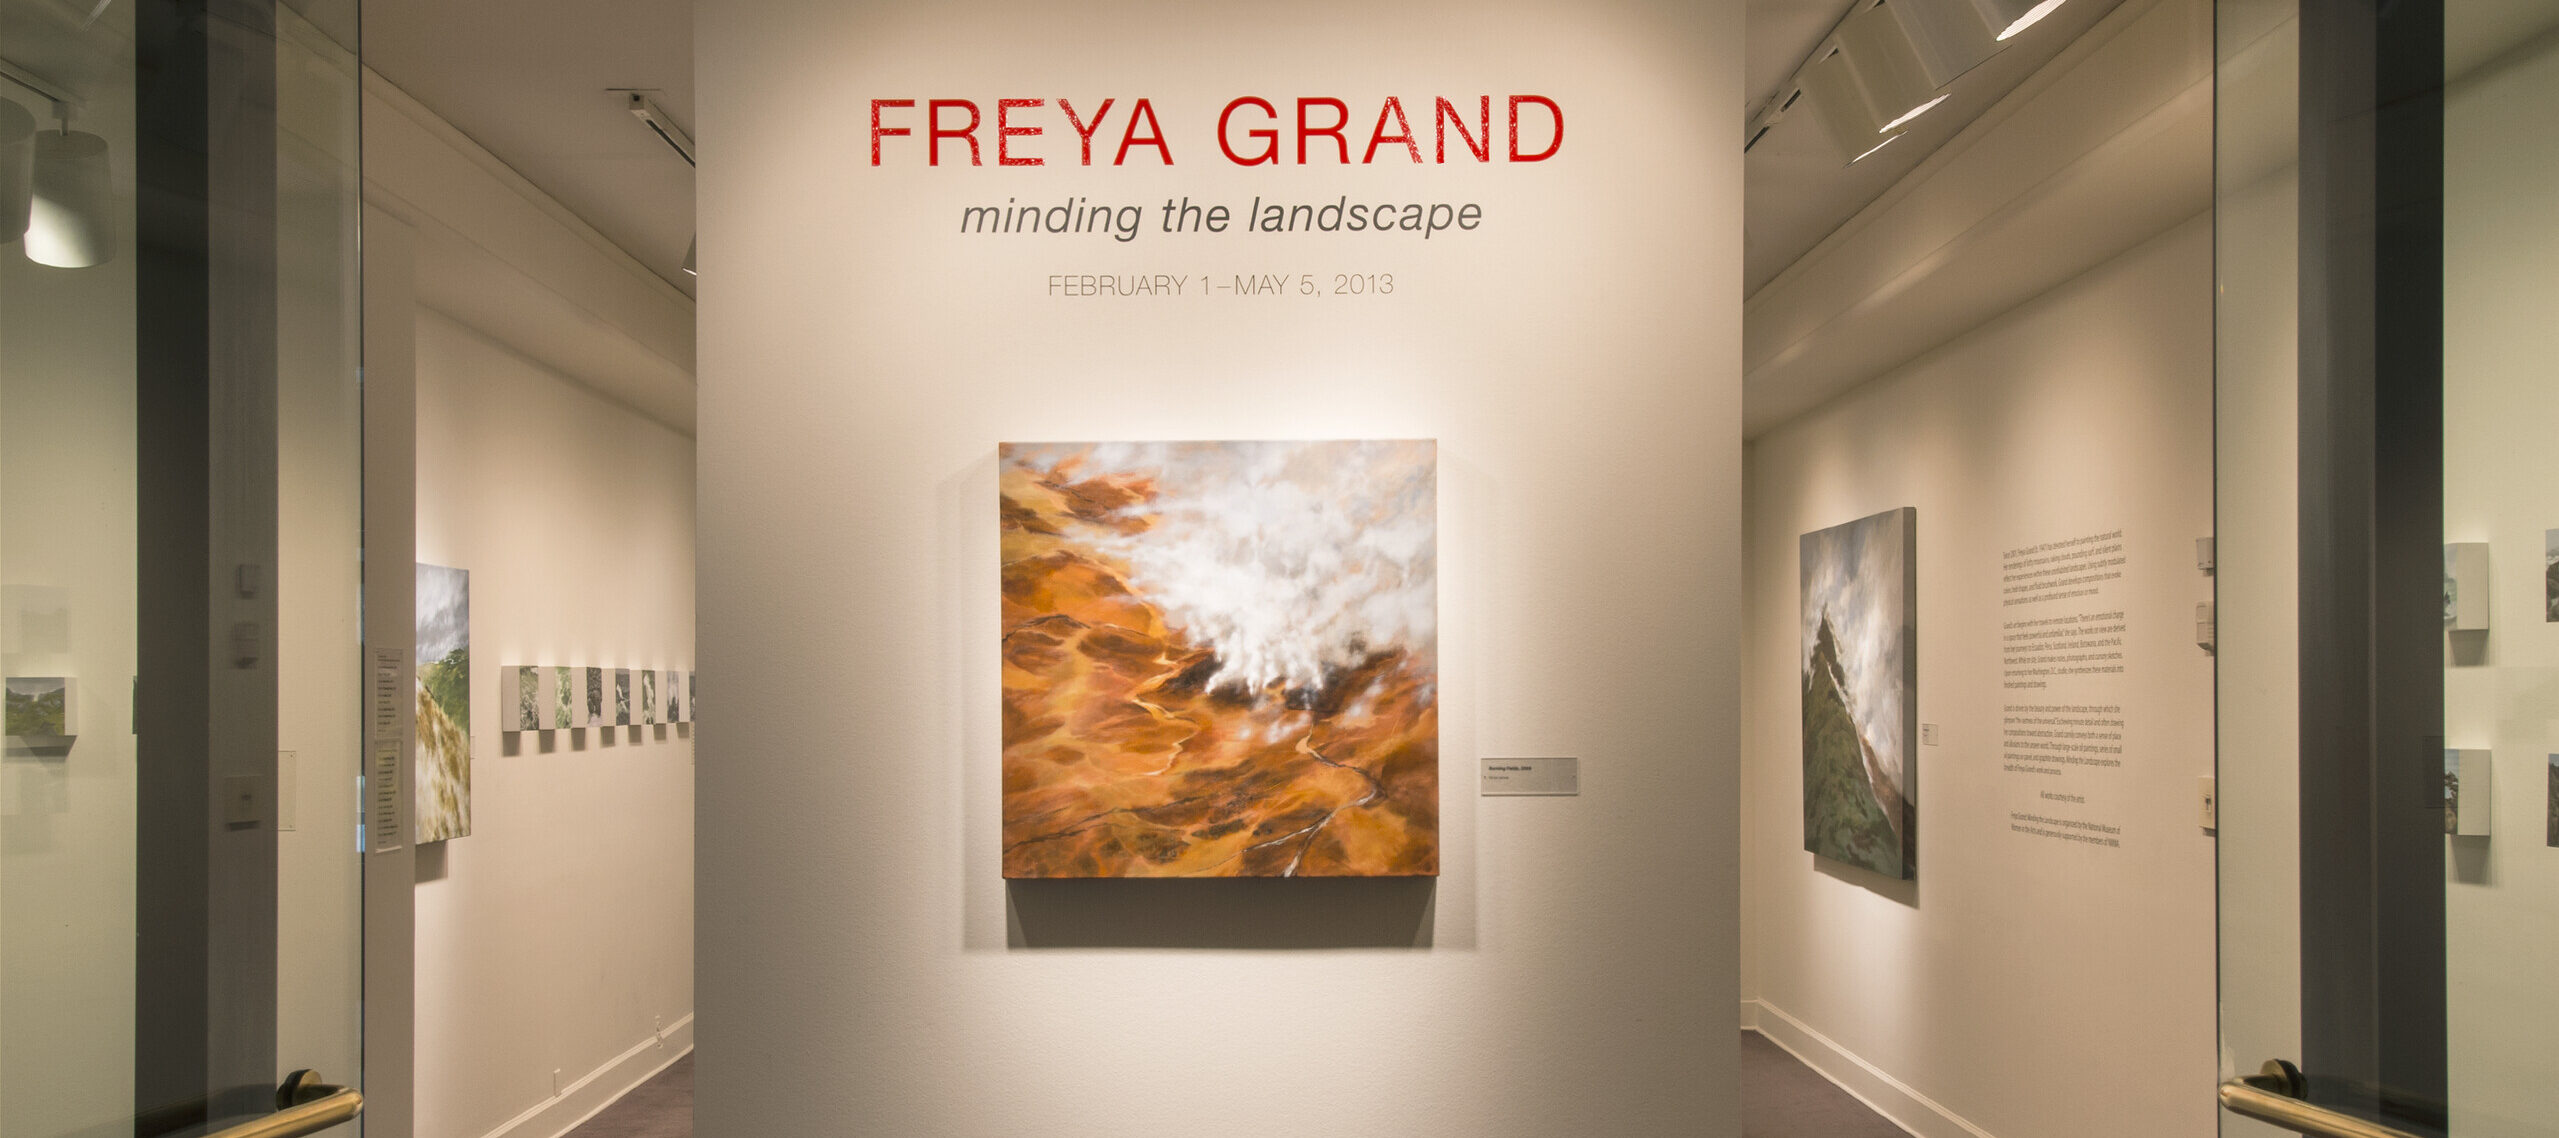 View of an installation. A large painting of a rock formation is hanging on a white wall under the text: 